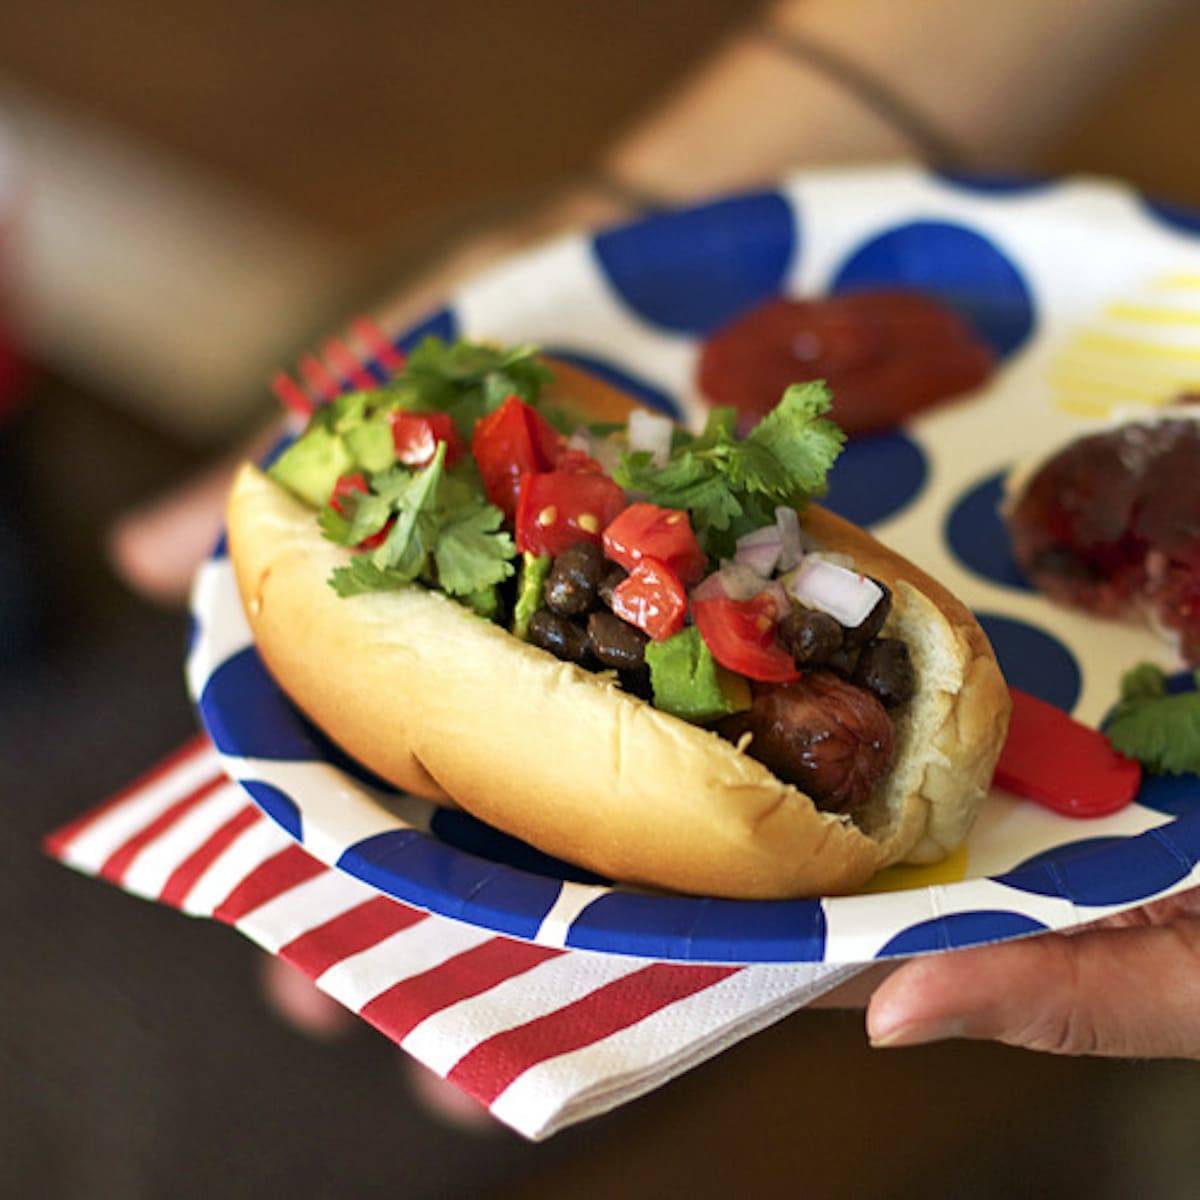 Hot dog with toppings on a red, white, and blue plate.